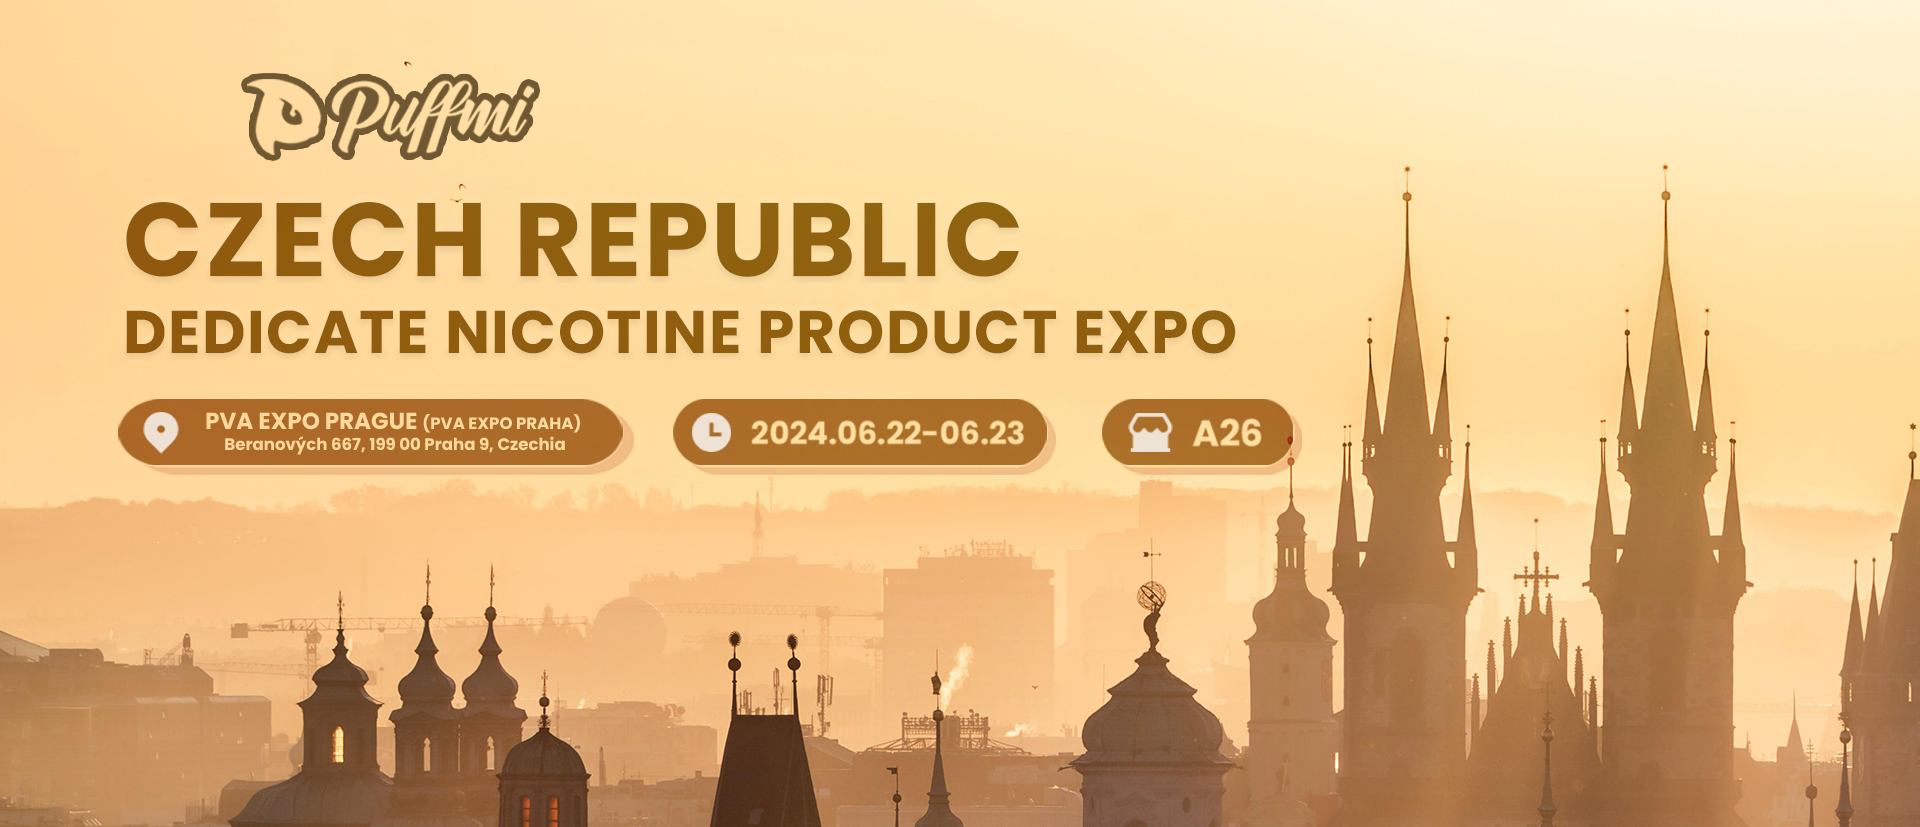 Puffmi to Showcase at the Dedicate Nicotine Product EXPO in Czech Republic!